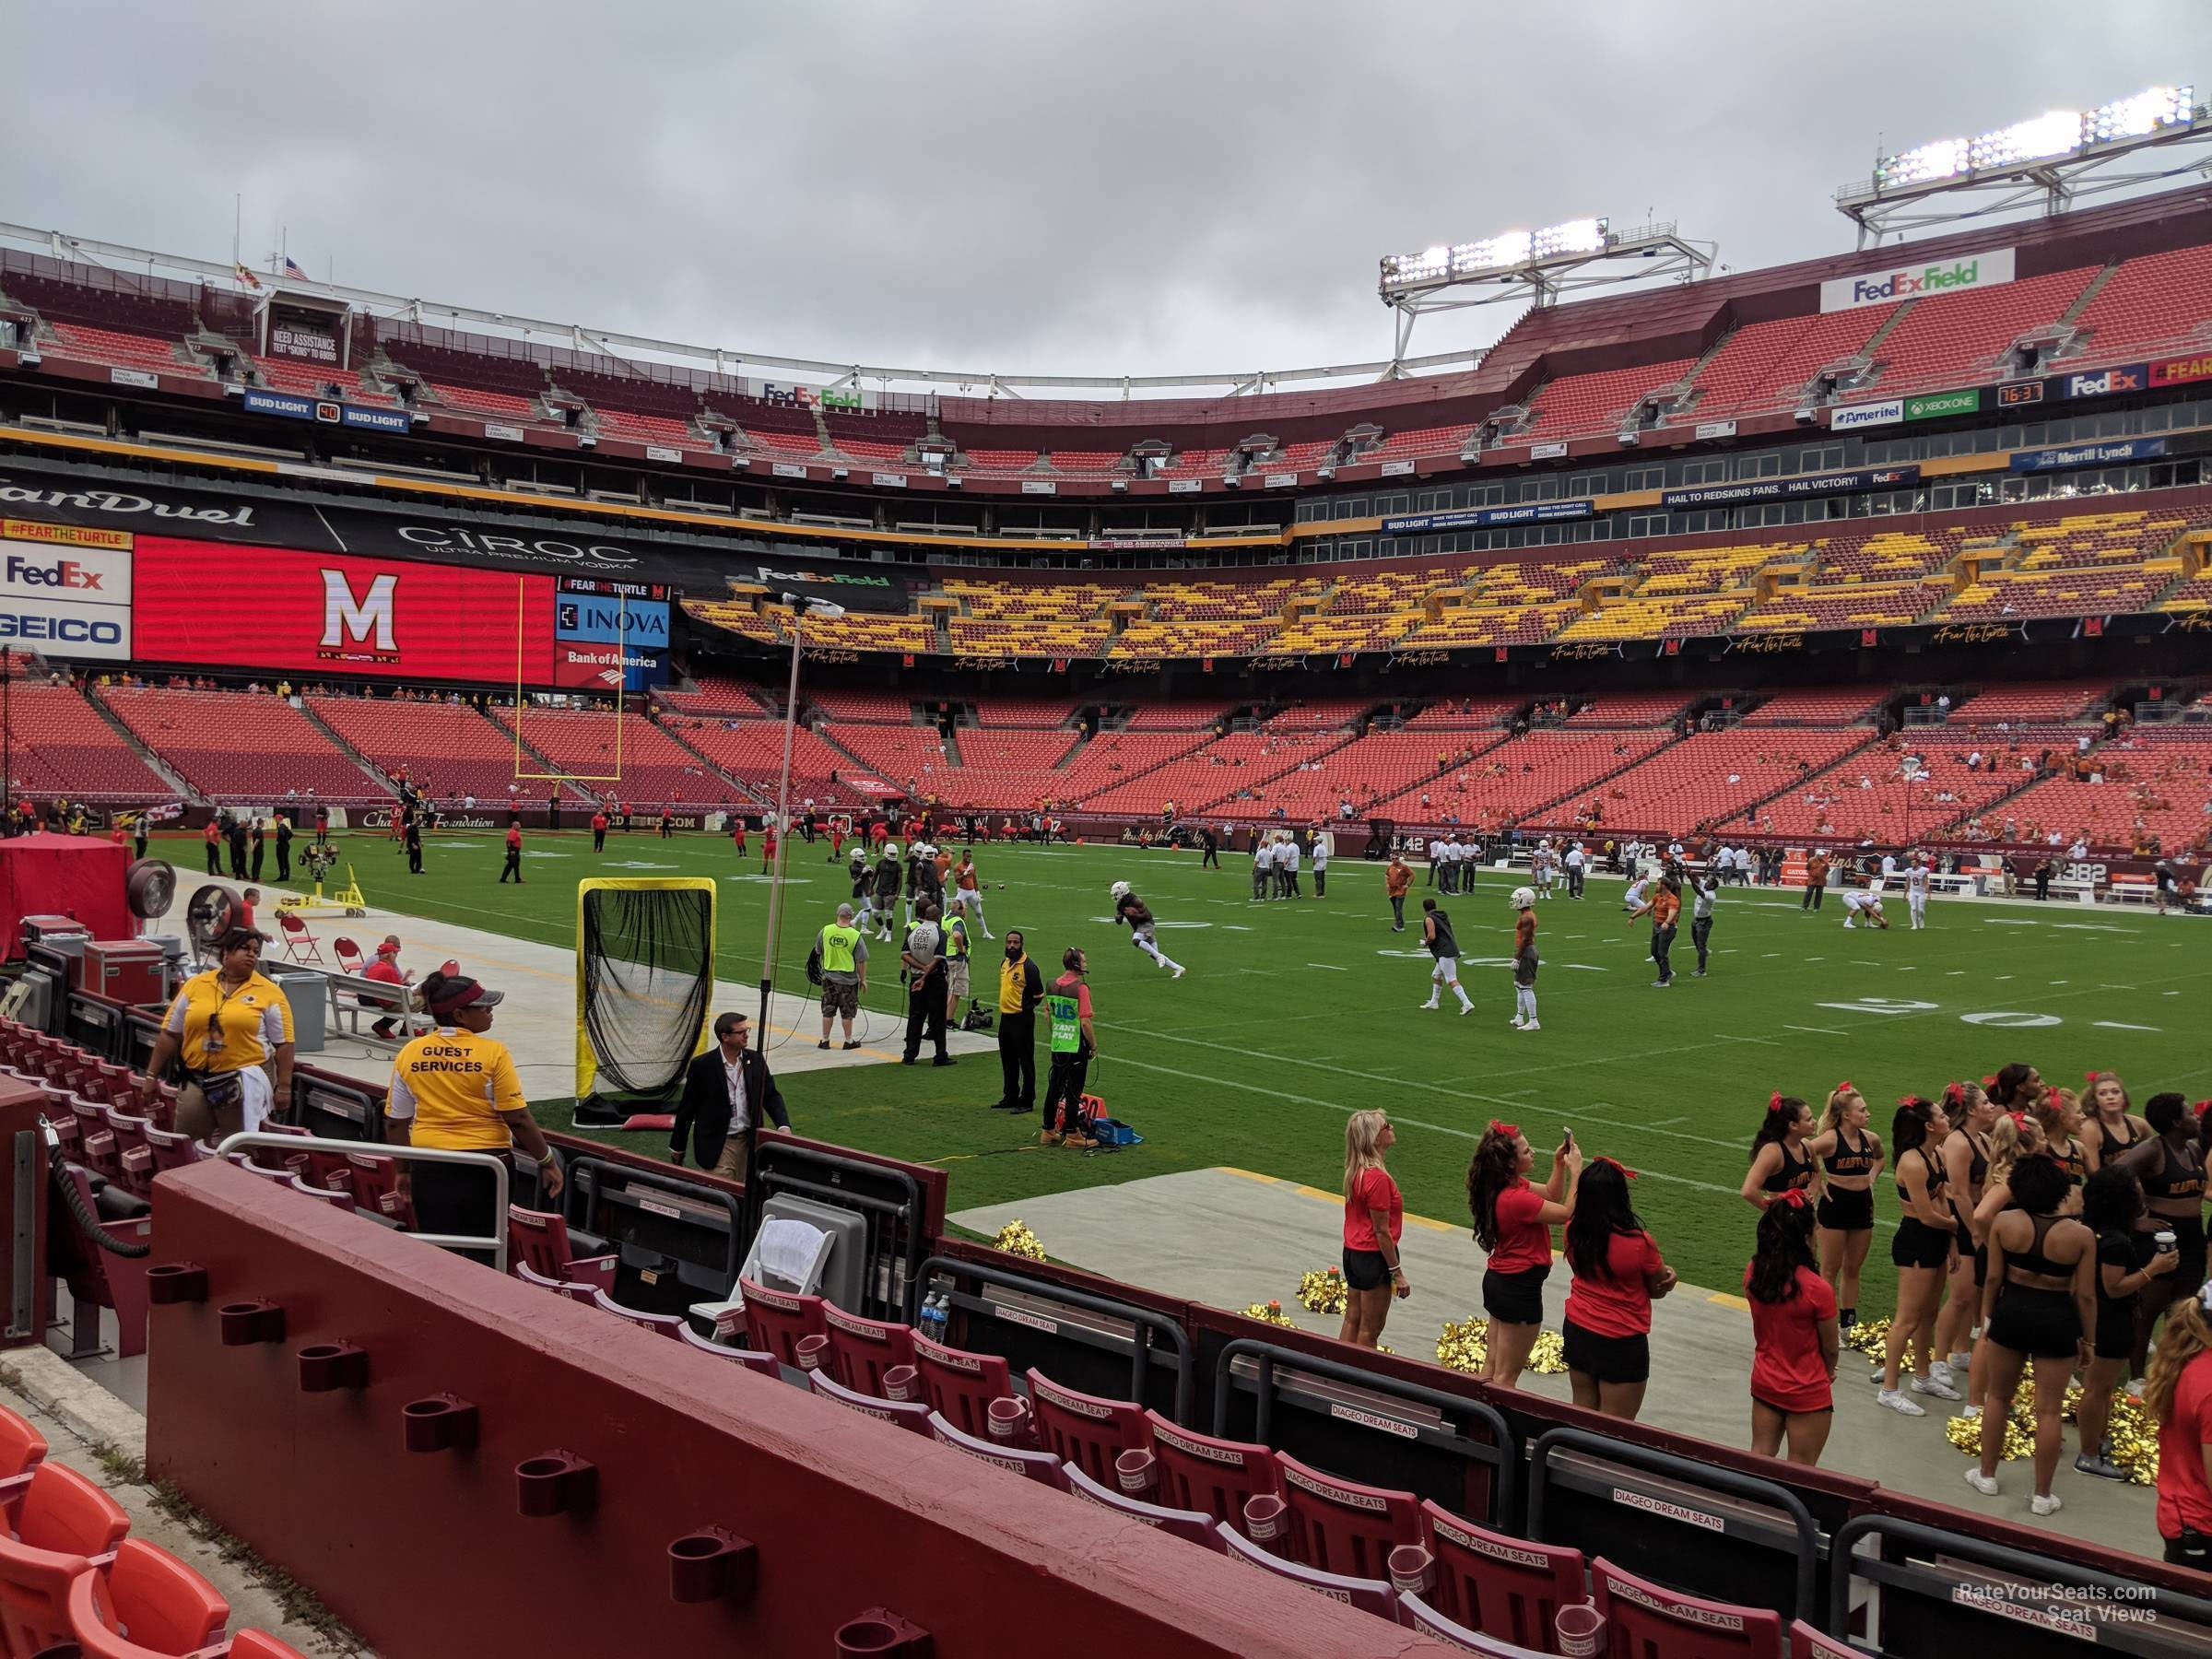 section 139, row 4 seat view  - fedexfield